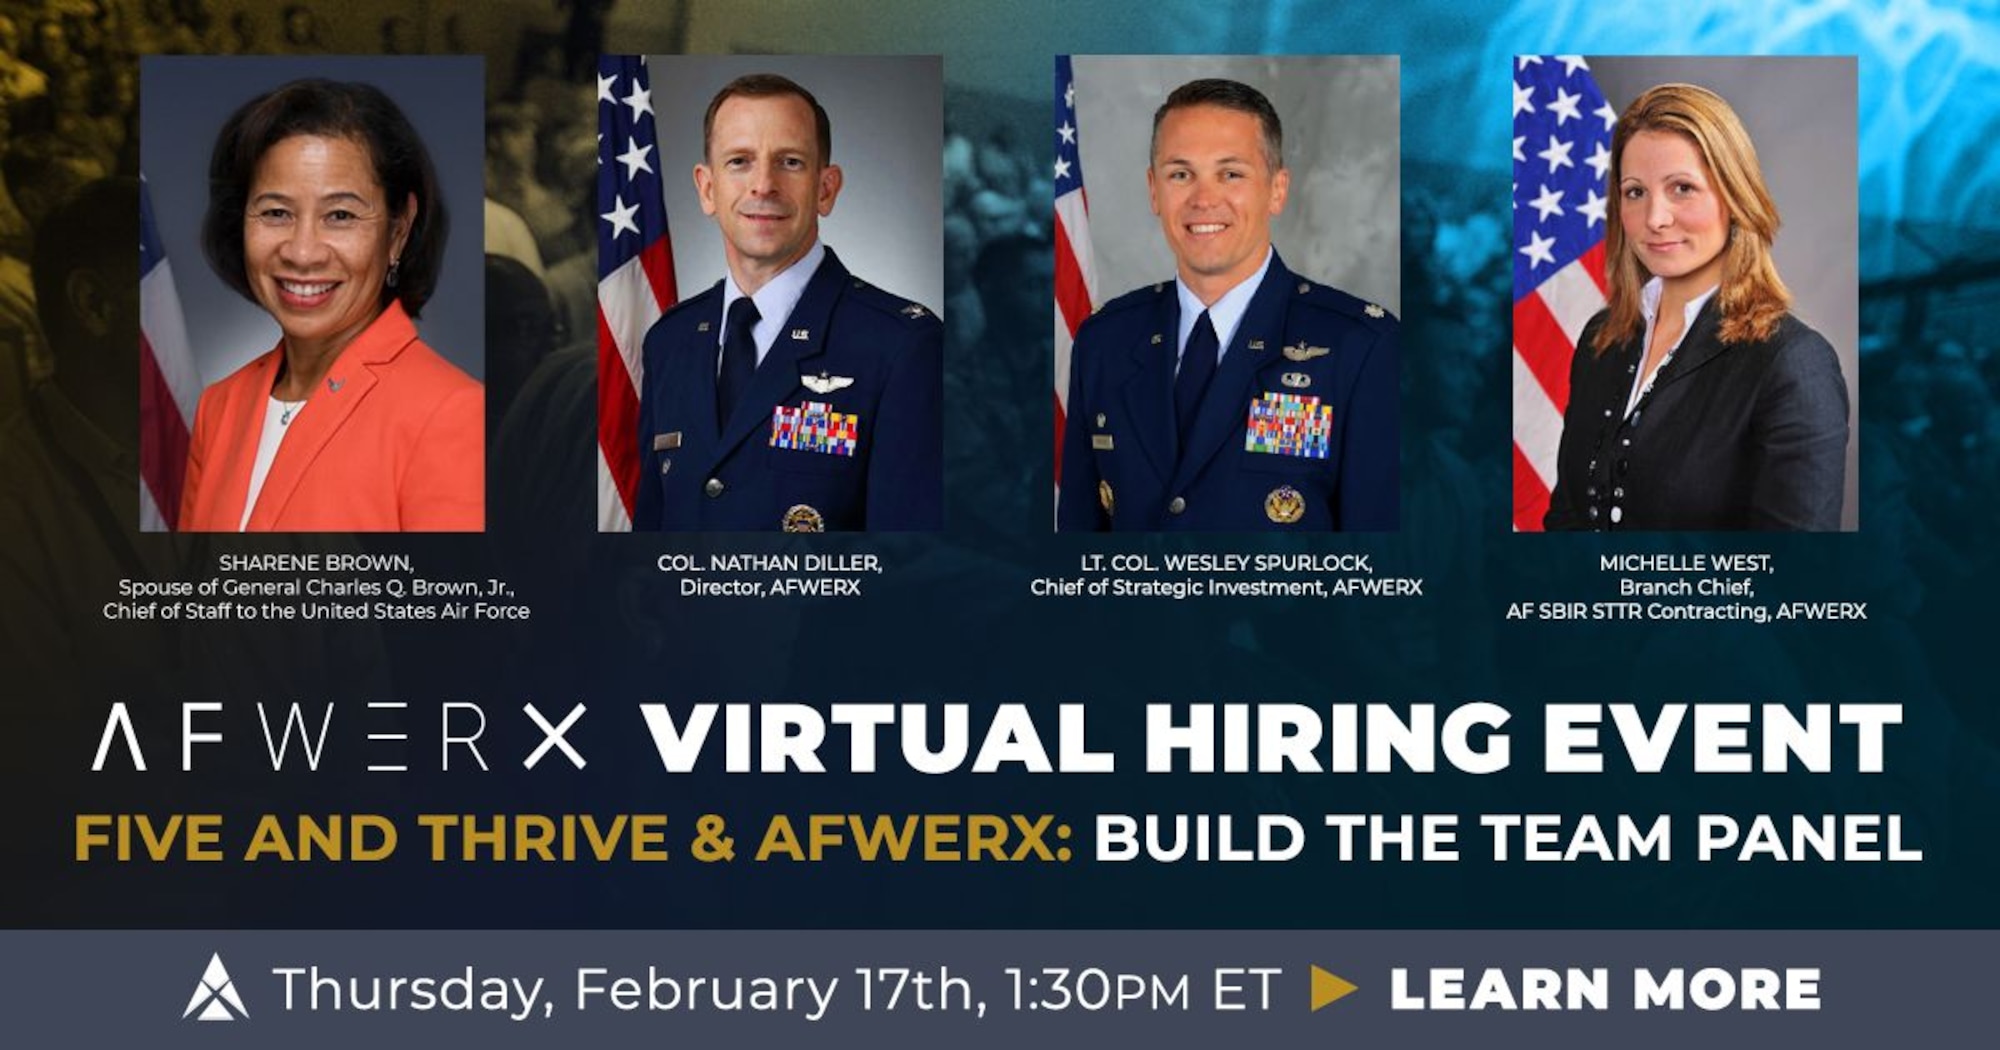 AFWERX will host a virtual hiring event and “Build the Team” panel featuring Mrs. Sharene Brown, spouse of the Air Force Chief of Staff, Gen. CQ Brown, Jr., February 17 from 1:30 - 3 p.m. EST. Joining Mrs. Brown on the panel will be AFWERX Chief of Strategic Investment, Lt. Col. Wesley Spurlock and AFWERX Contracting Branch Chief, Michelle West. AFWERX Director, Col. Nathan Diller will moderate the discussion. (Courtesy graphic)